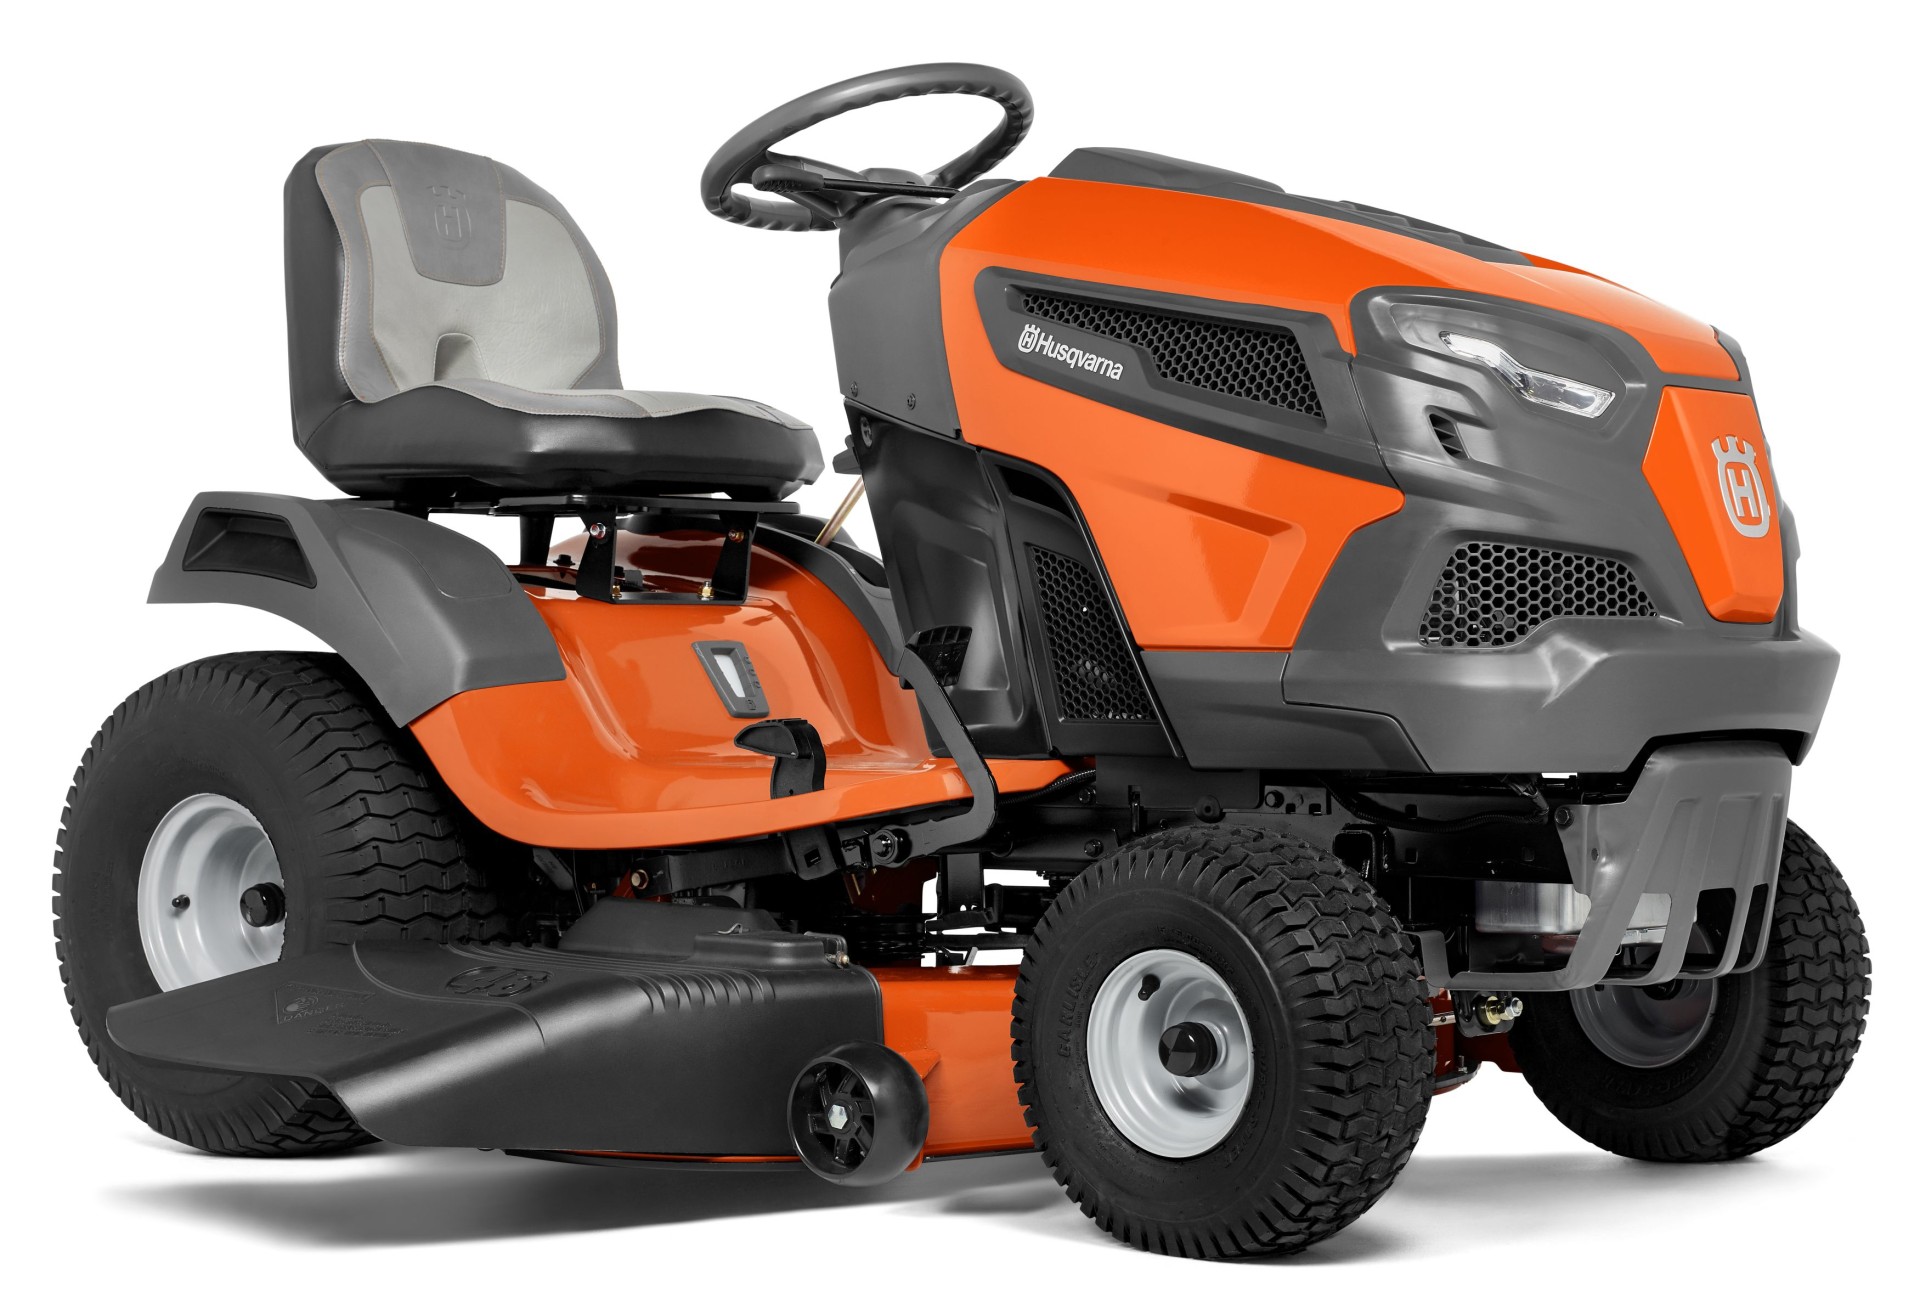 Husqvarna Hu800awd 190 Cc 22 In Self Propelled Gas Lawn Mower With Honda Engine In The Gas Push Lawn Mowers Department At Lowes Com